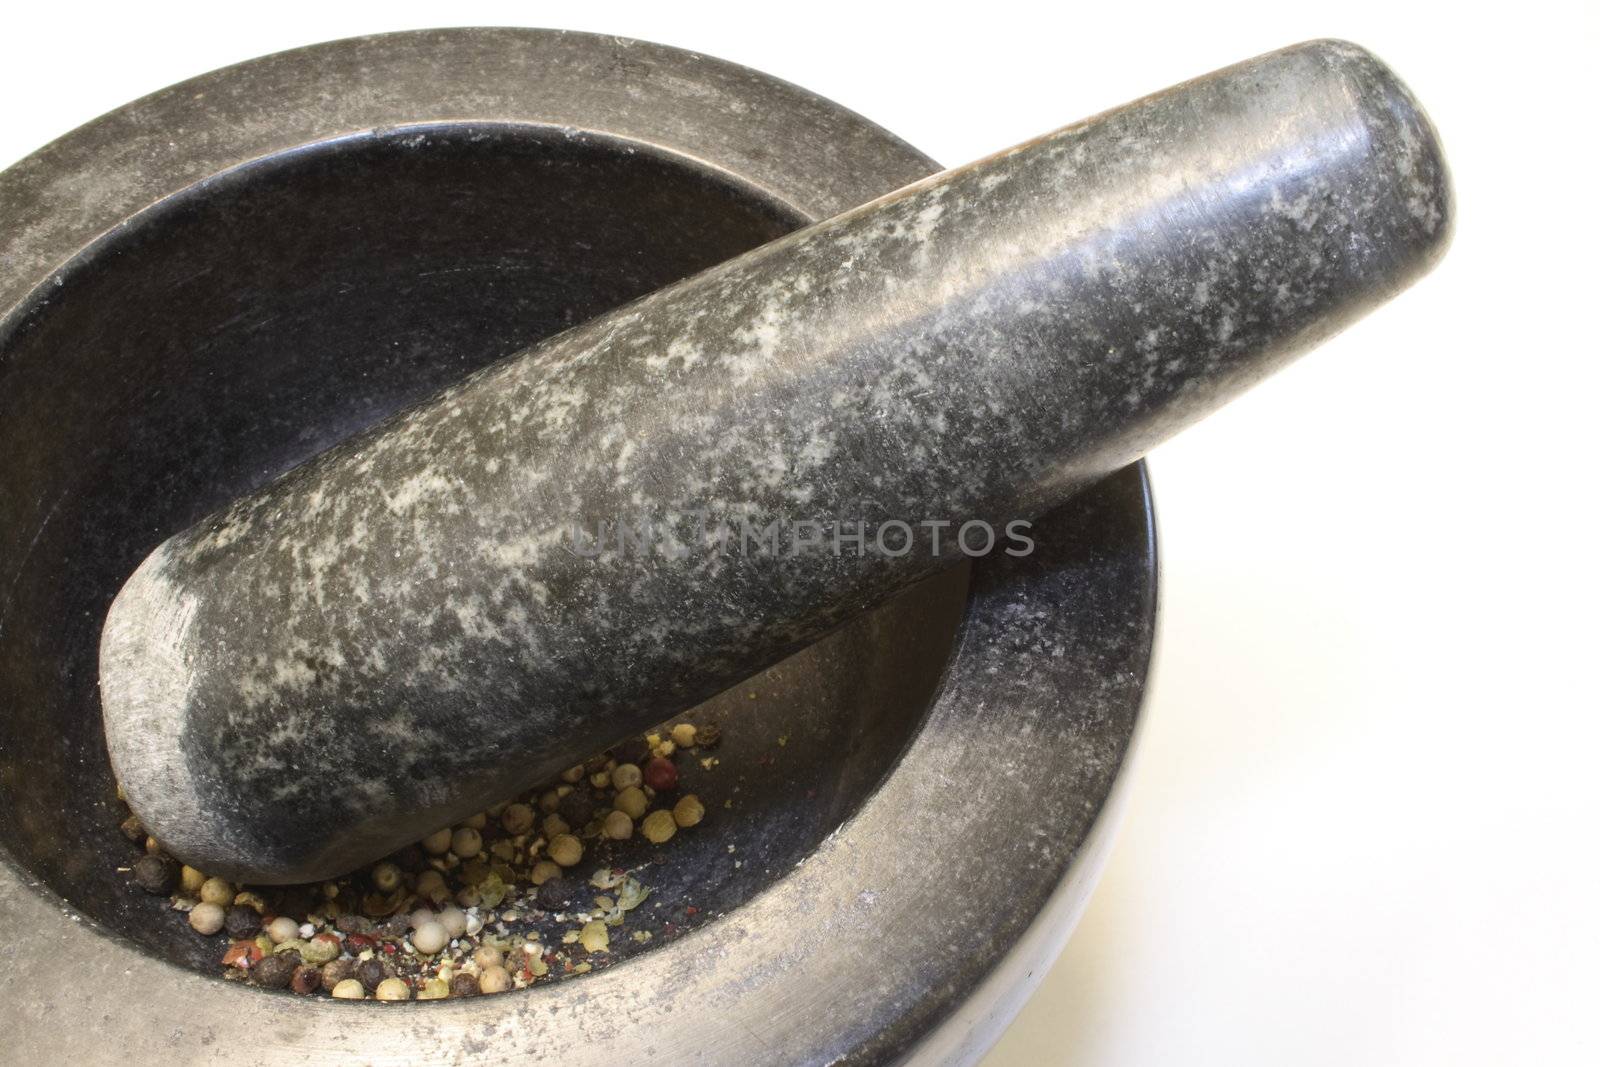 grinding pepper corns in a black granite pestle and mortar bowl isolated over a white background